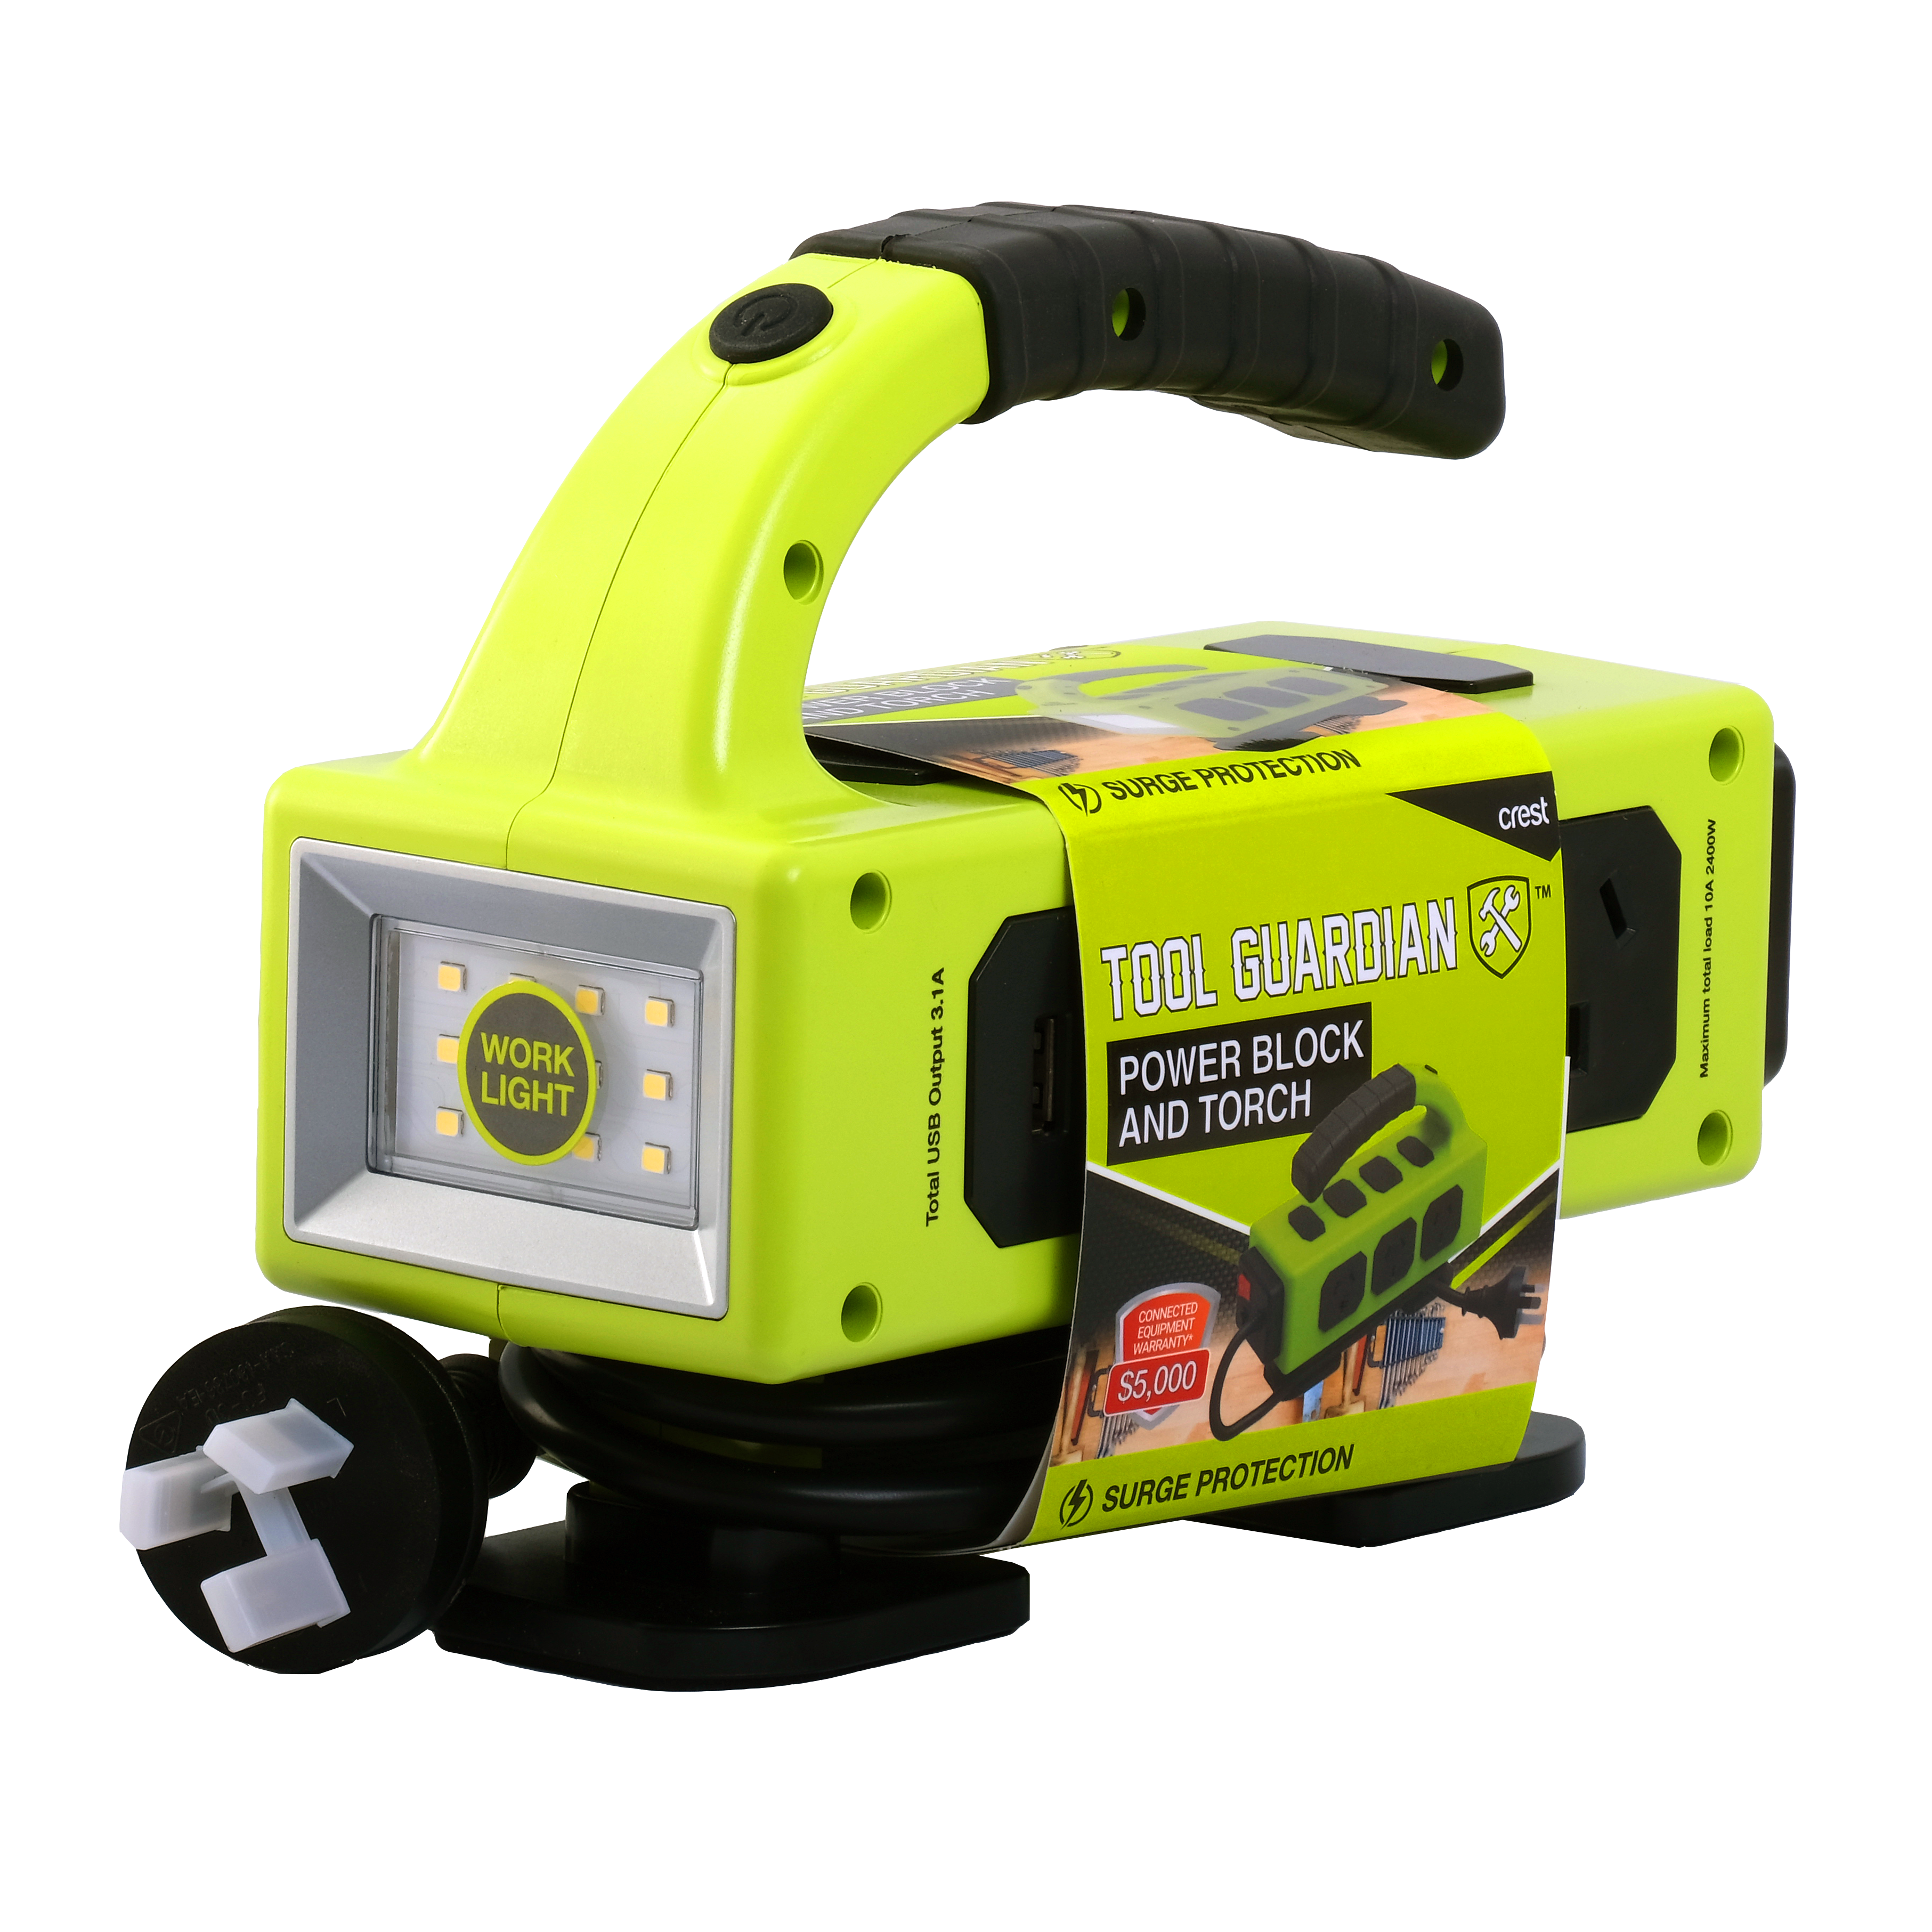 Tool Guardian 5 Socket Power Board with Worklight and USB Charging - Green